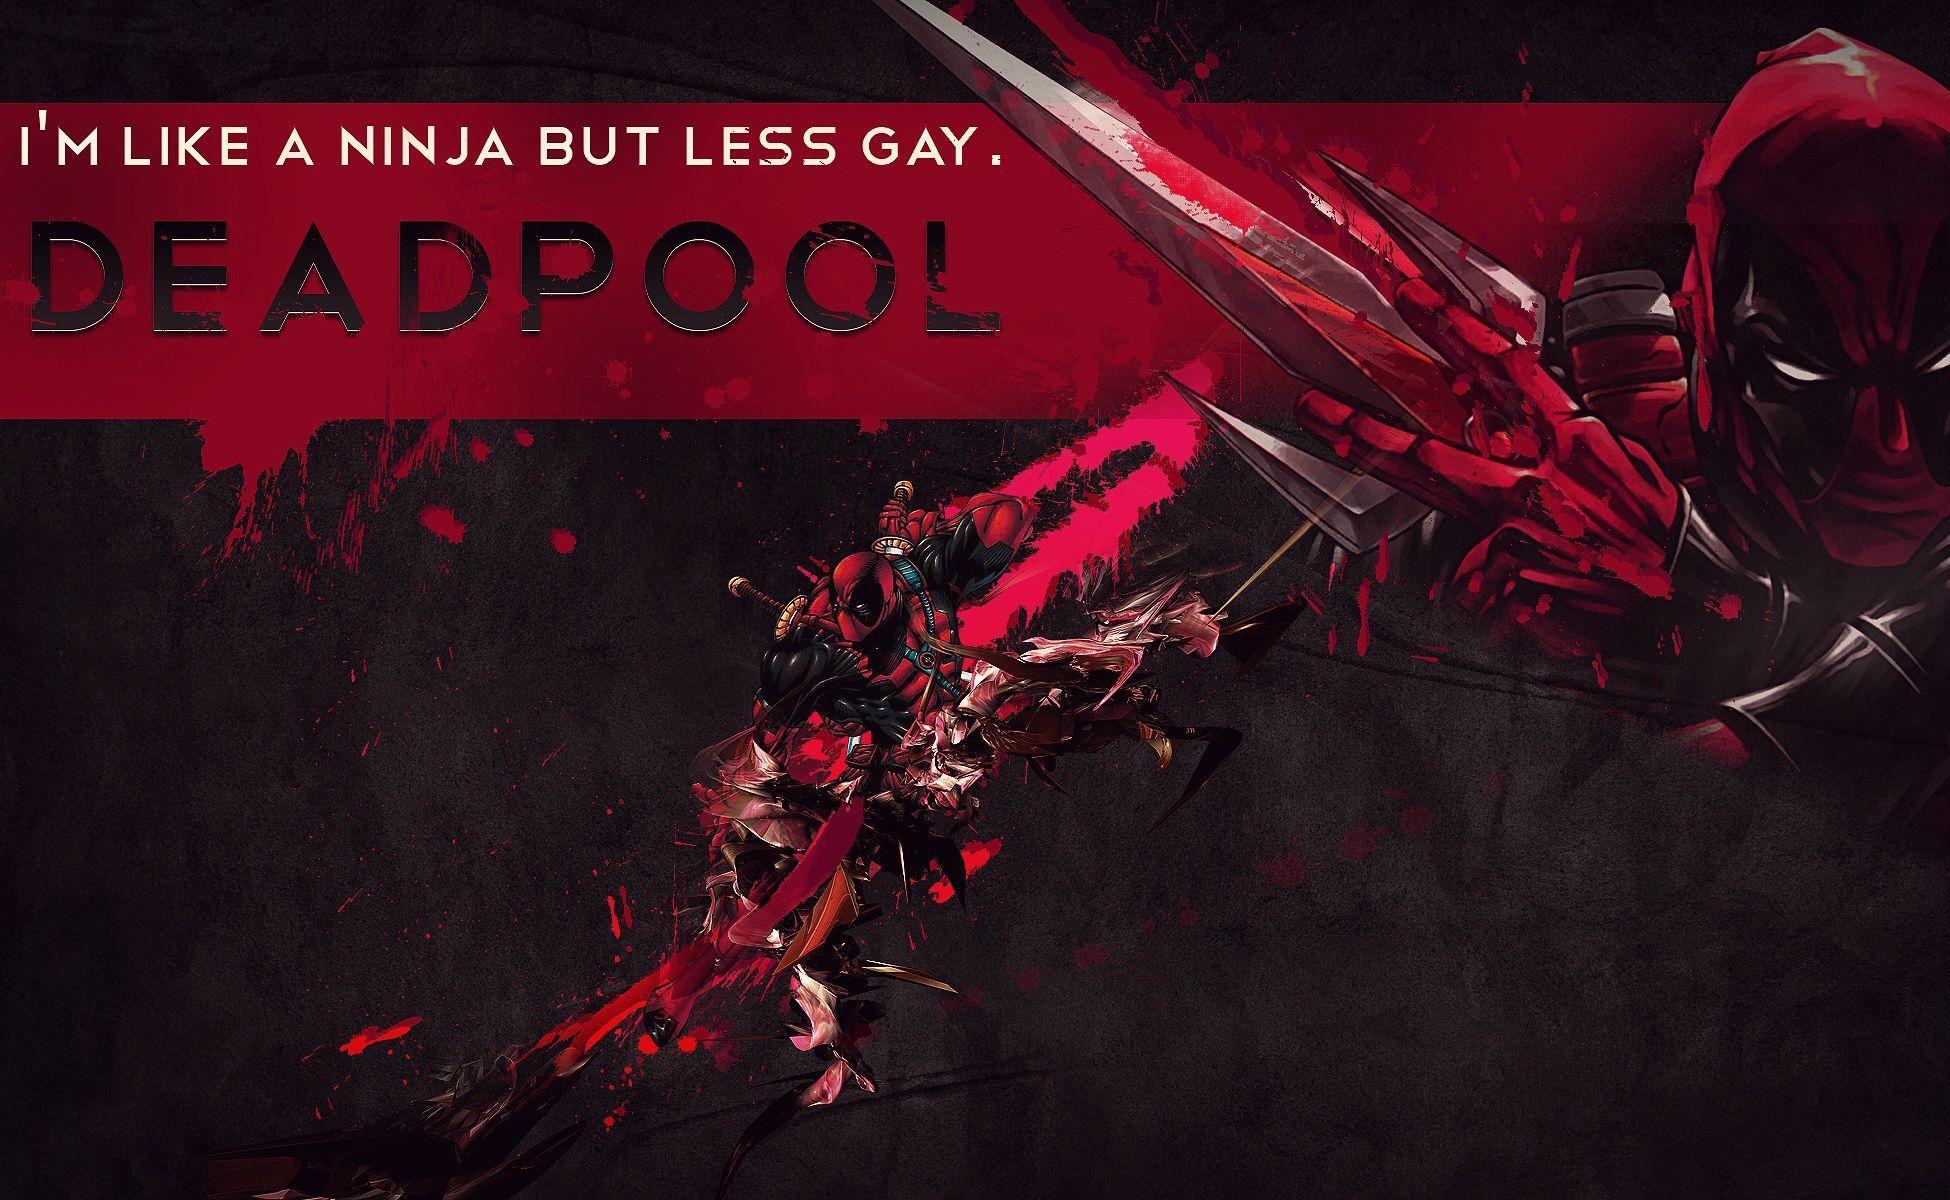 of the Most Wicked High Definition Deadpool Wallpaper